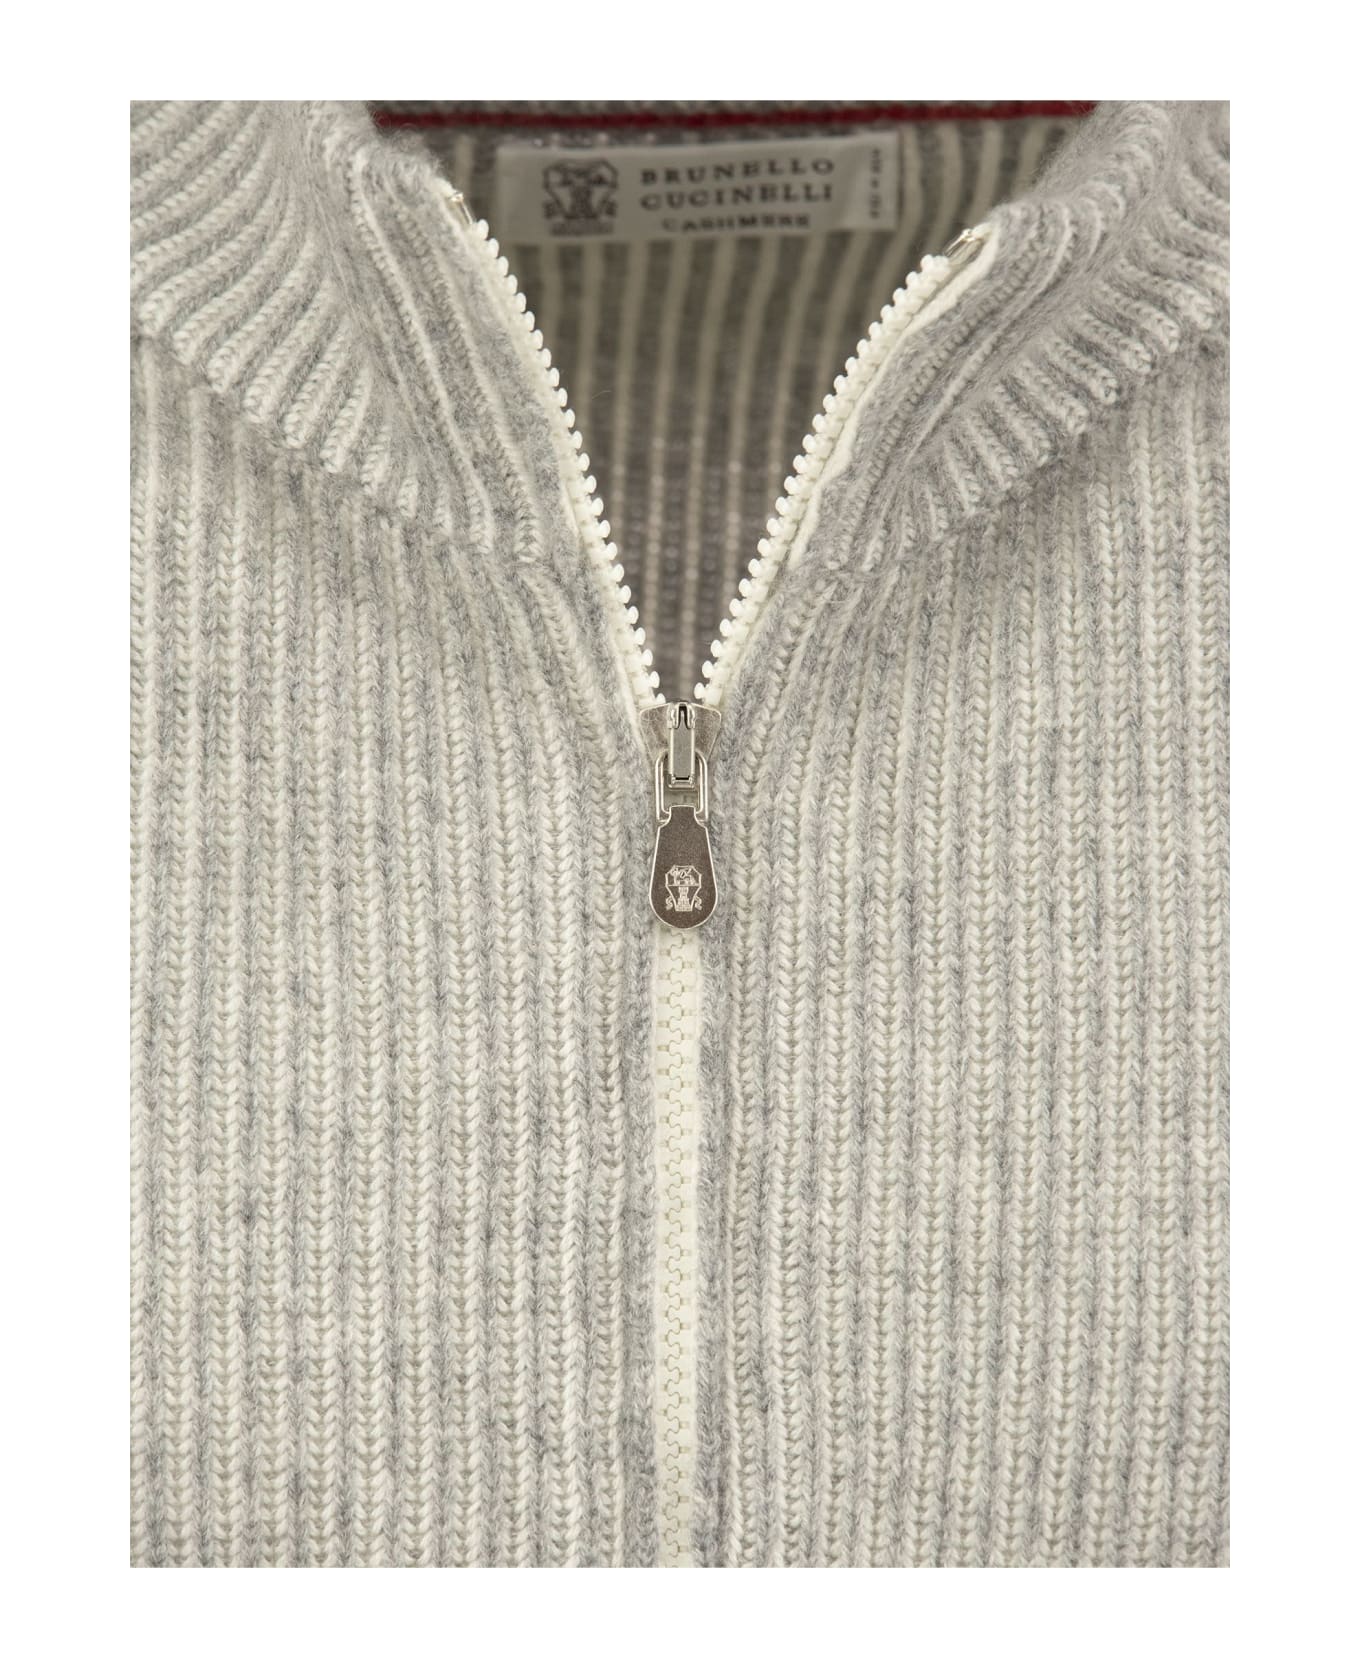 Brunello Cucinelli Zipped Cardigan Sweater With High Vanisè Collar In Cashmere - Grey ニットウェア